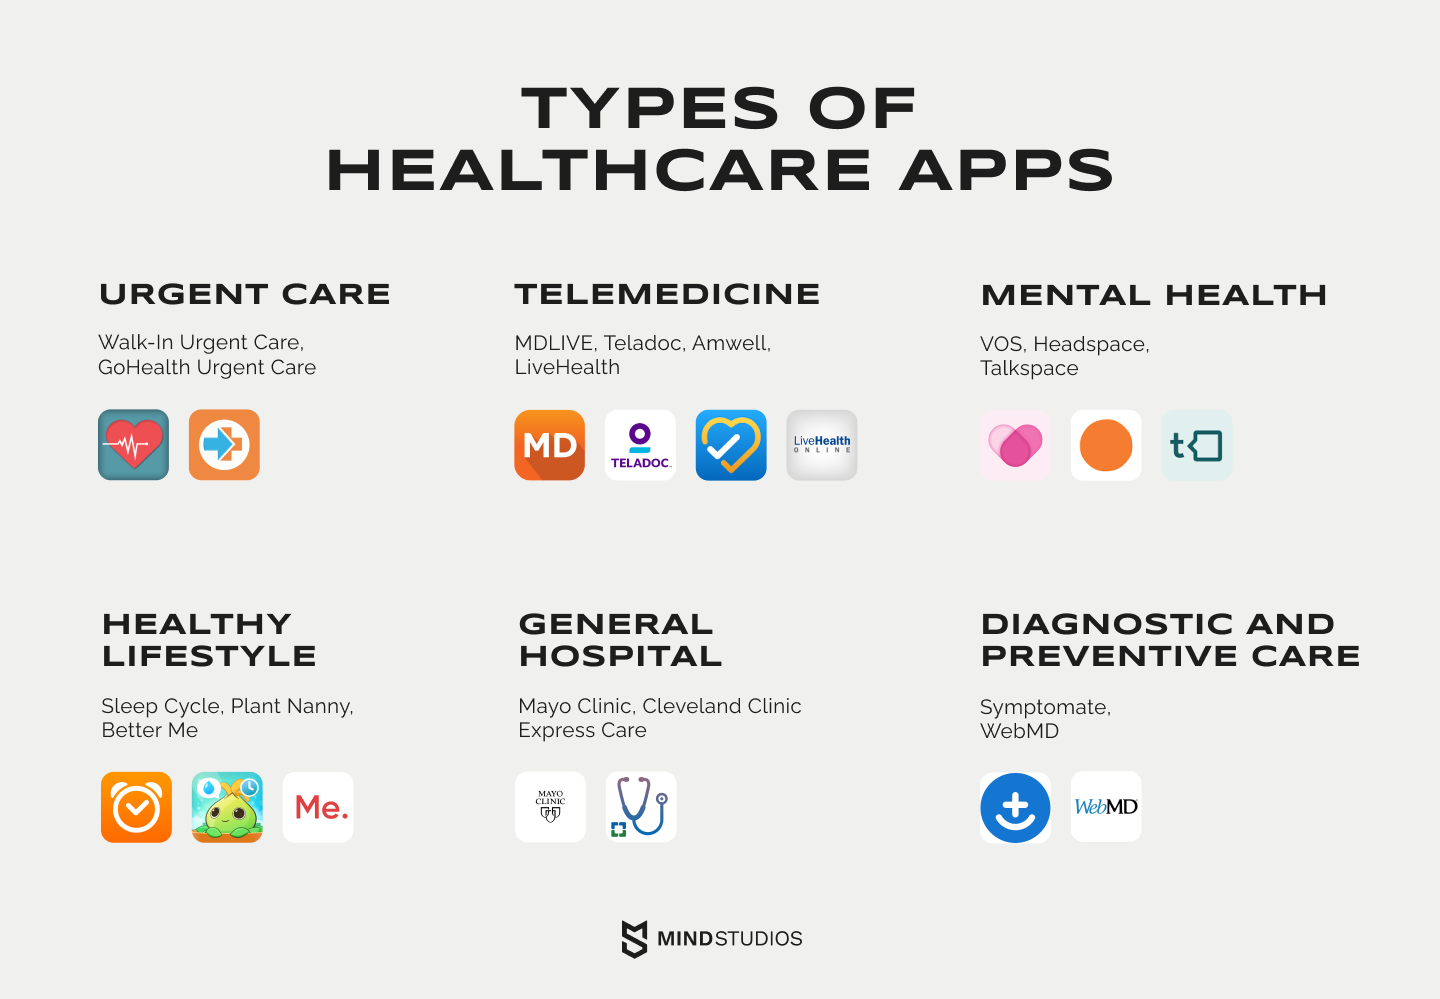 Types of healthcare apps